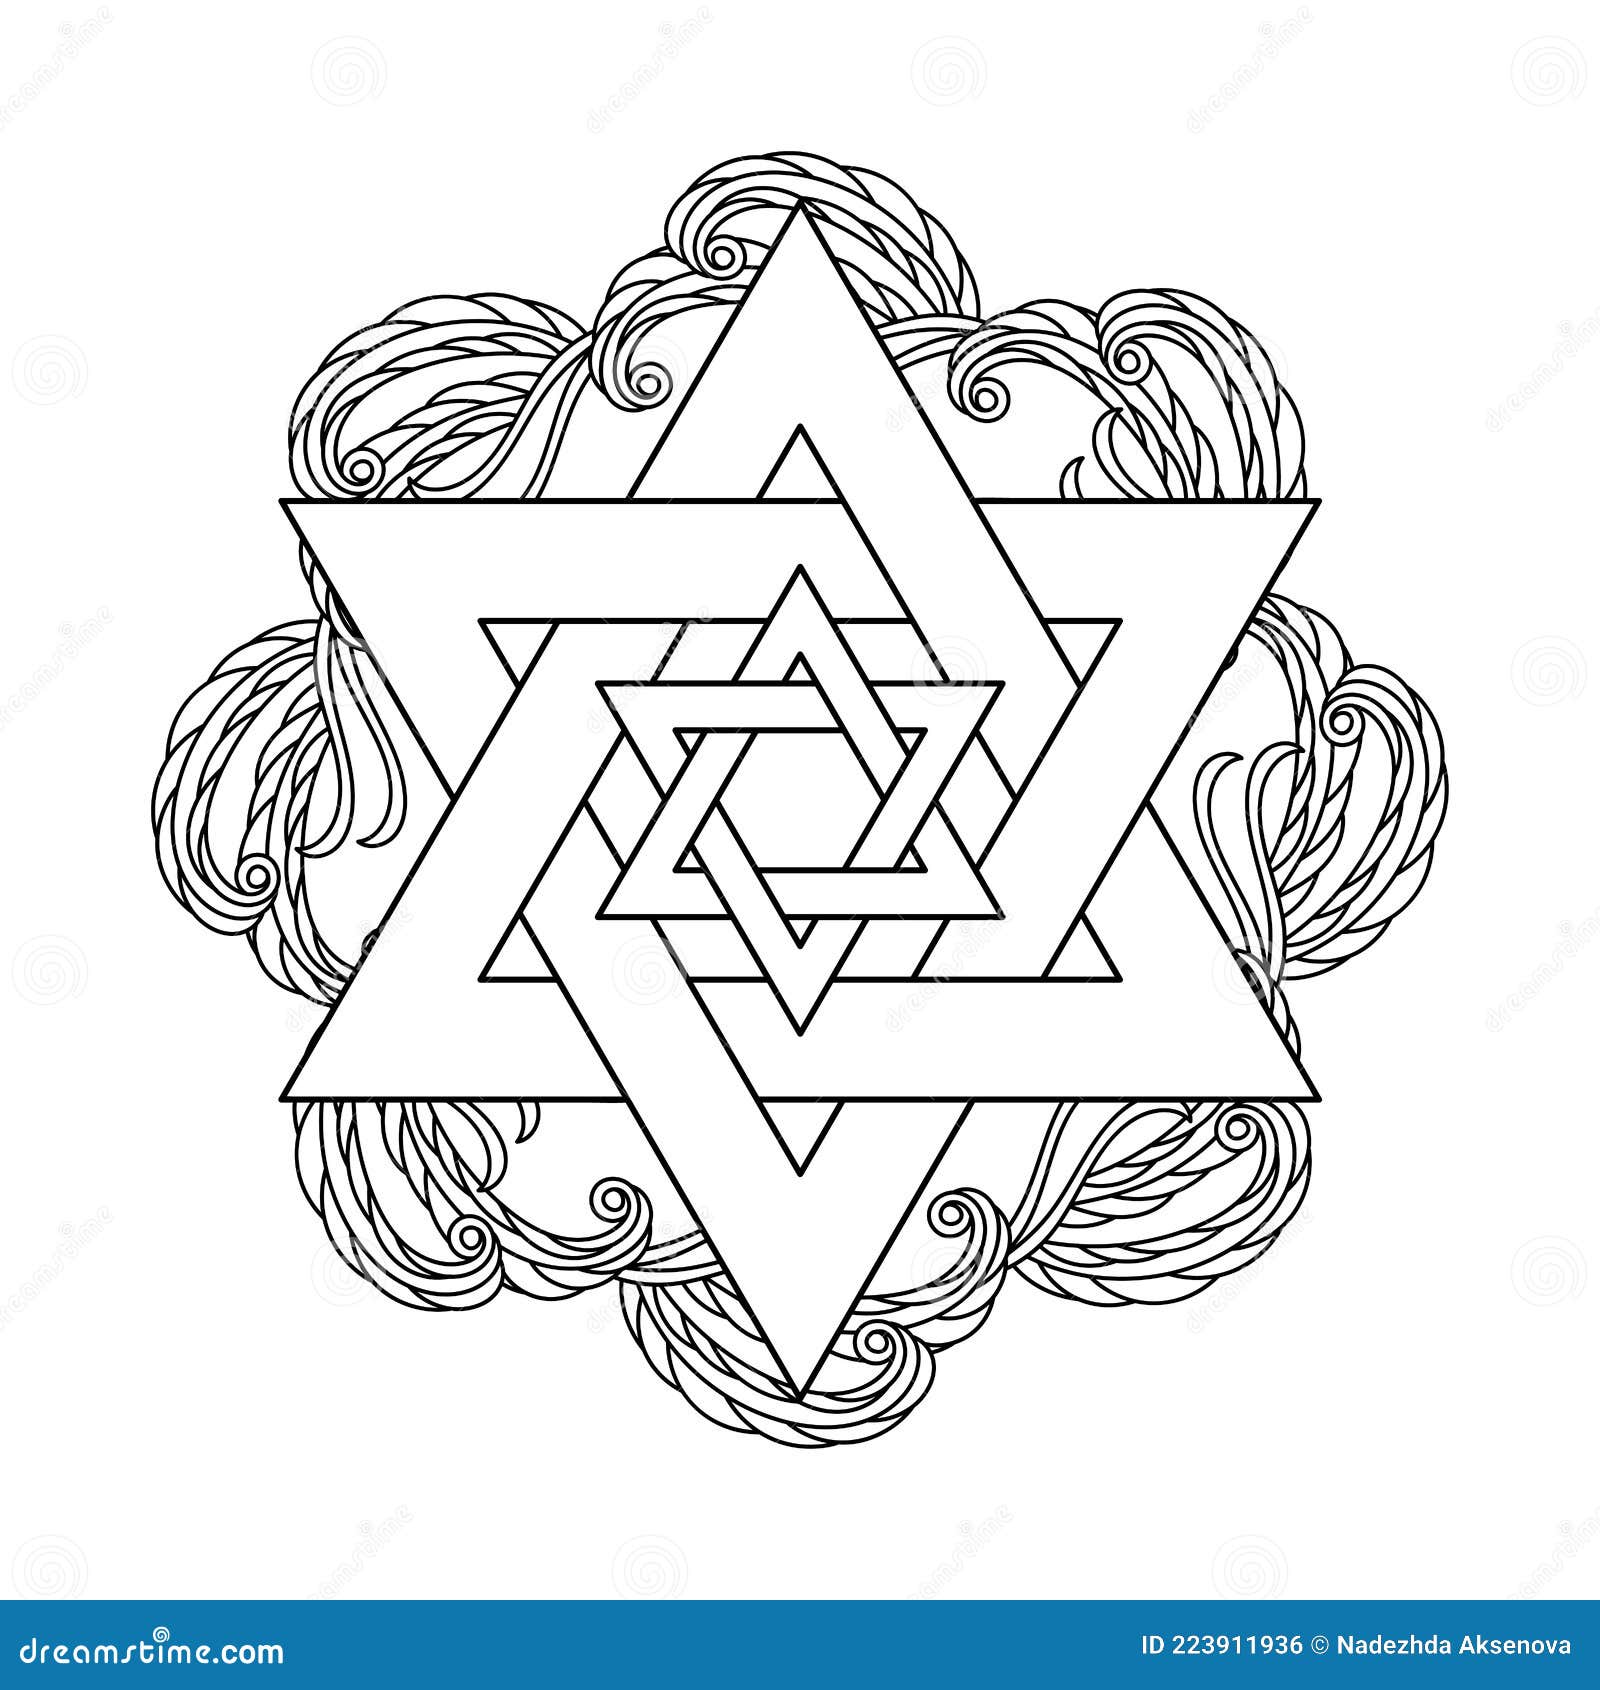 Jewish star of david coloring book abstract plant ornament stock vector